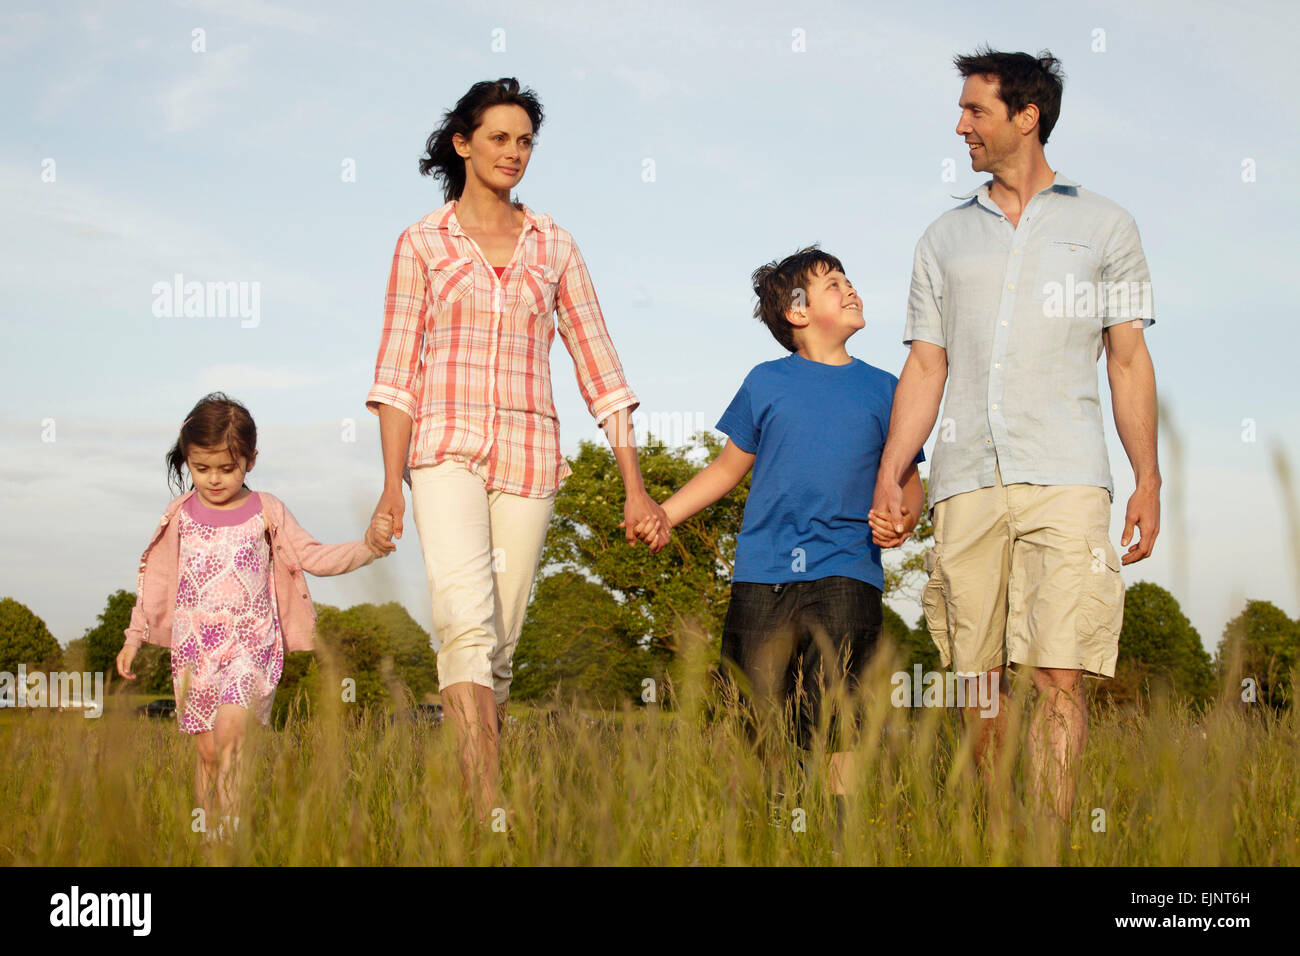 A family, two parents and two children walking hand in hand outdoors through long grass. Stock Photo